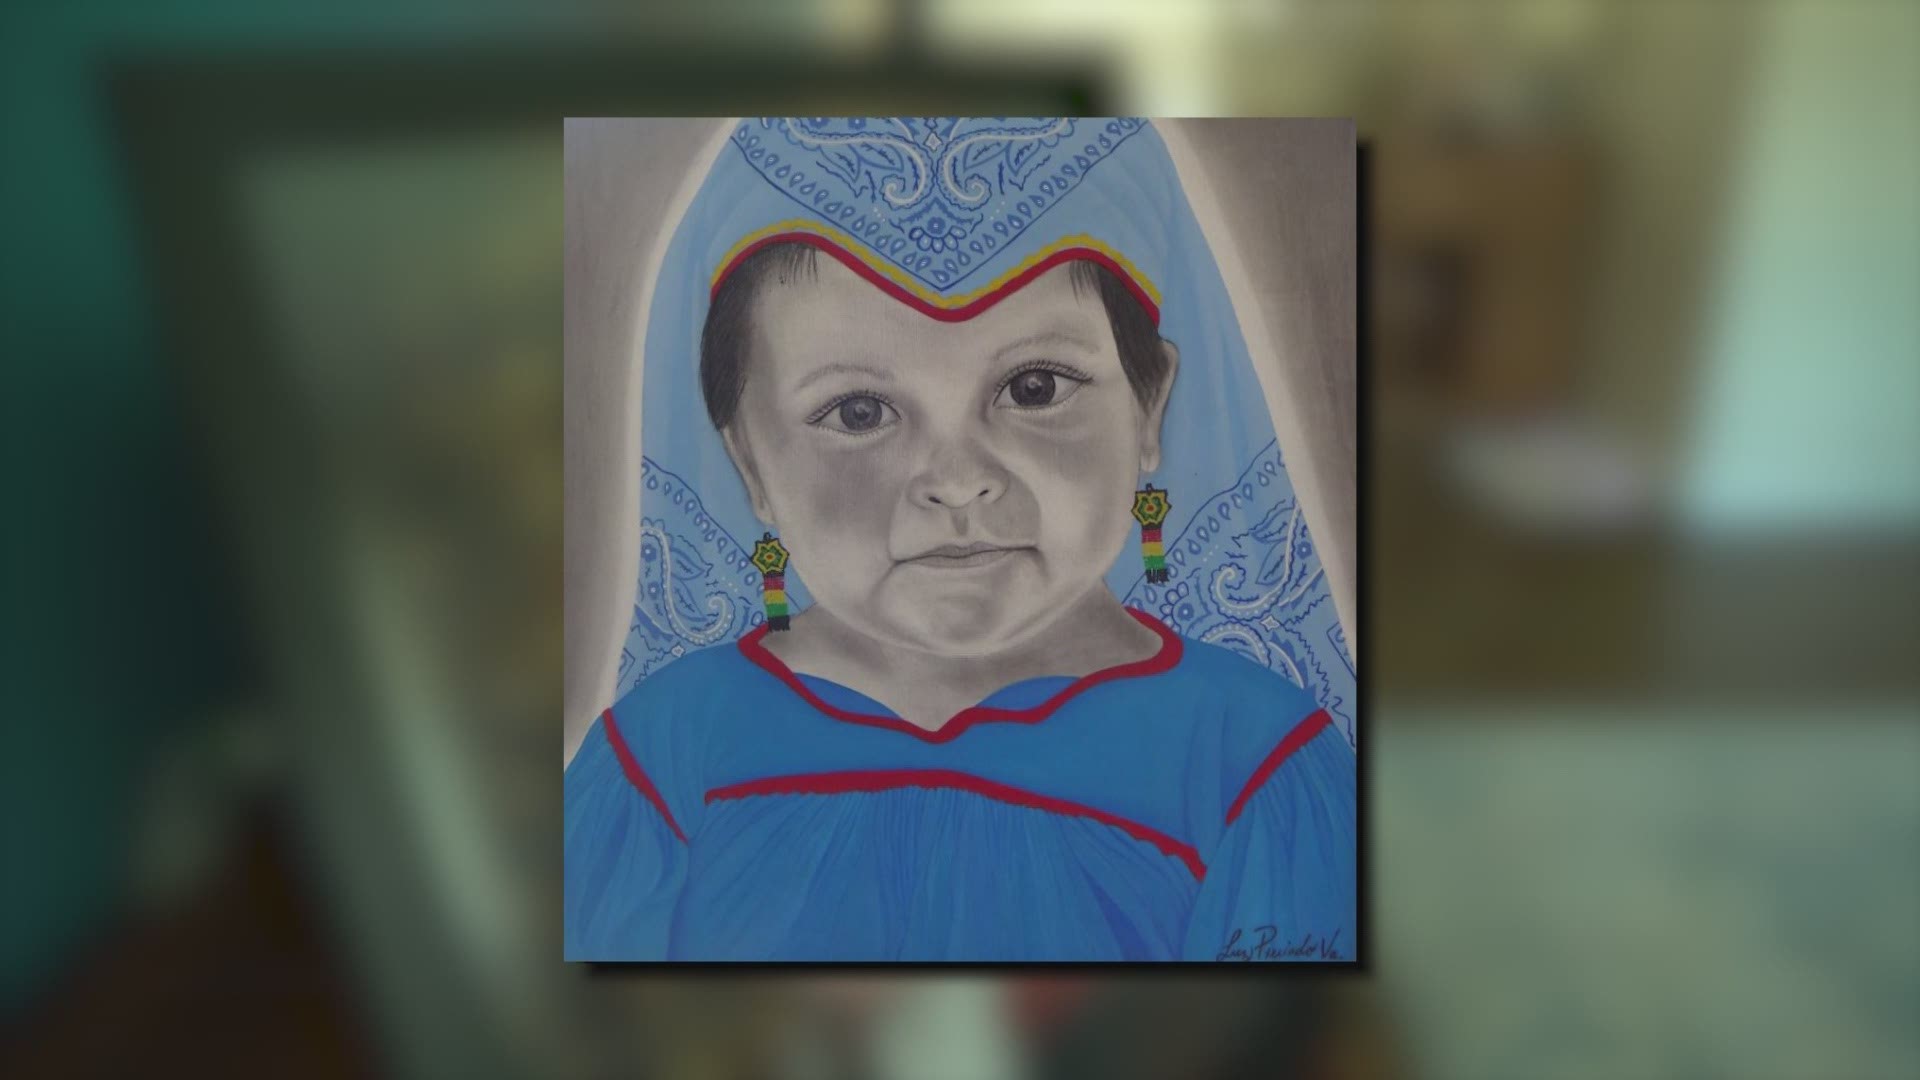 Sarah Ritchie mistakenly donated the portrait of her son with other items to the Bedford Goodwill in 2018. She's offering a $1,500 reward to get it back.